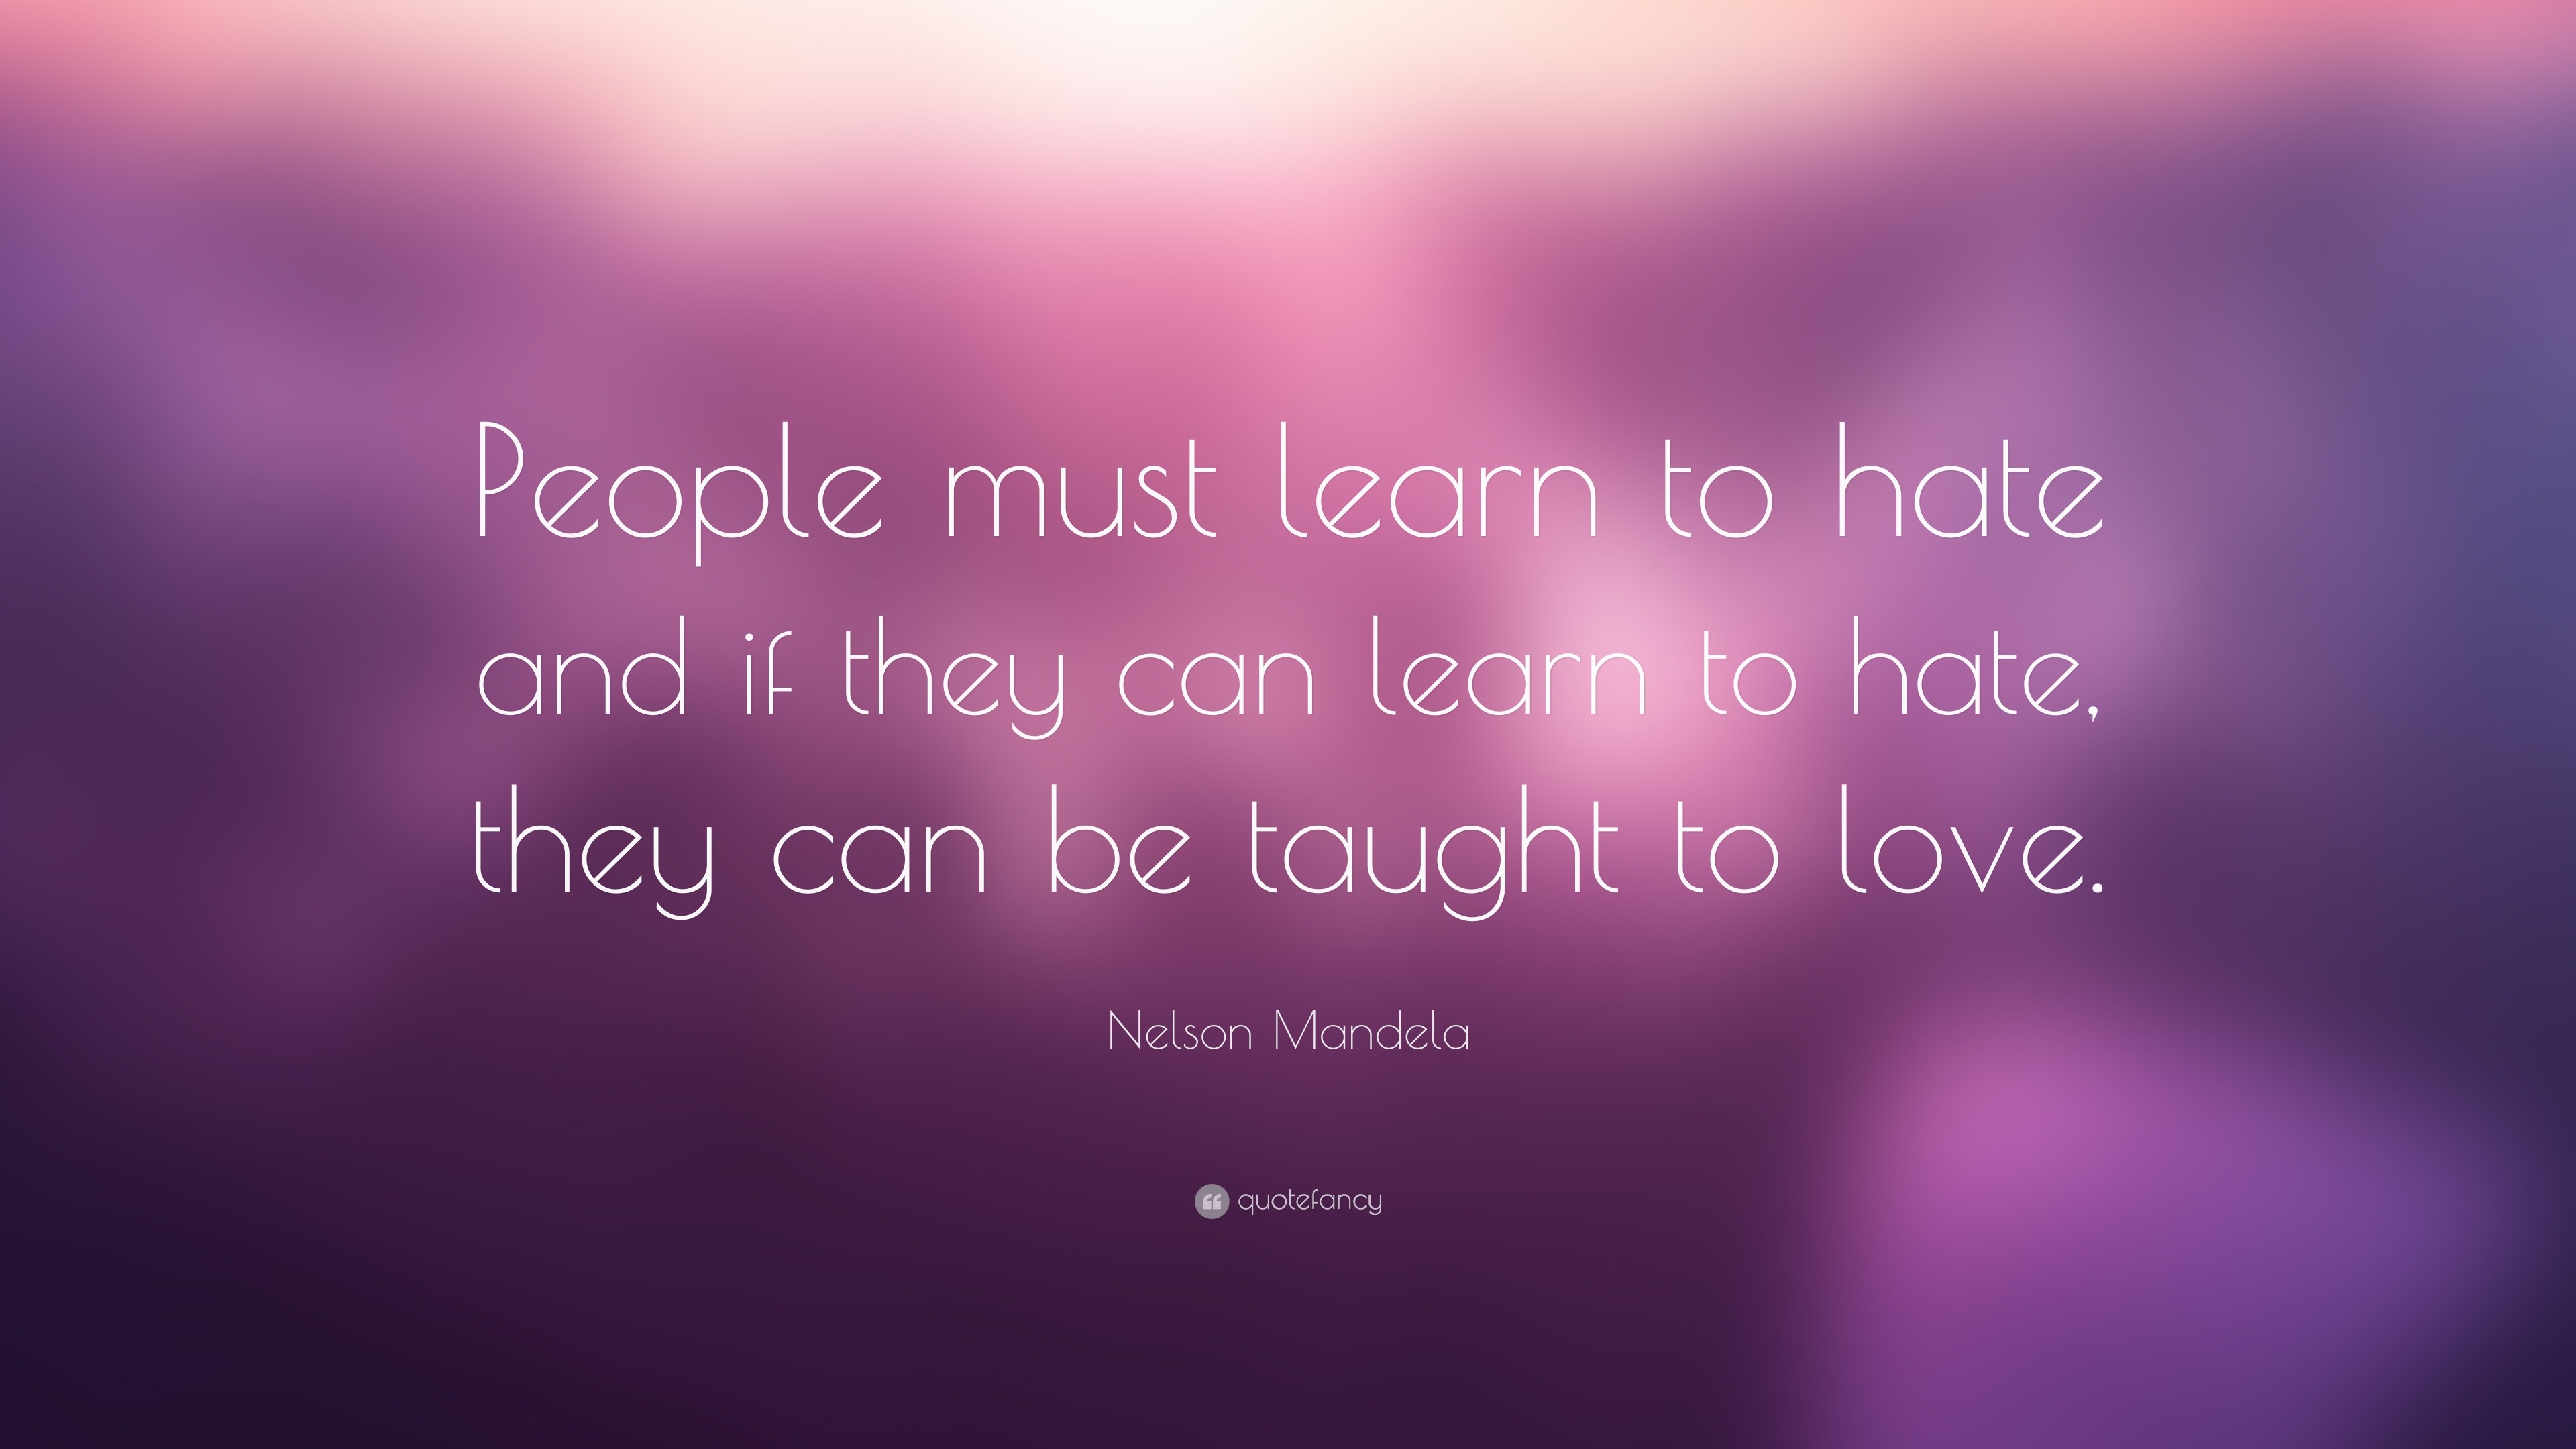 Nelson Mandela Quote “People must learn to hate and if they can learn to